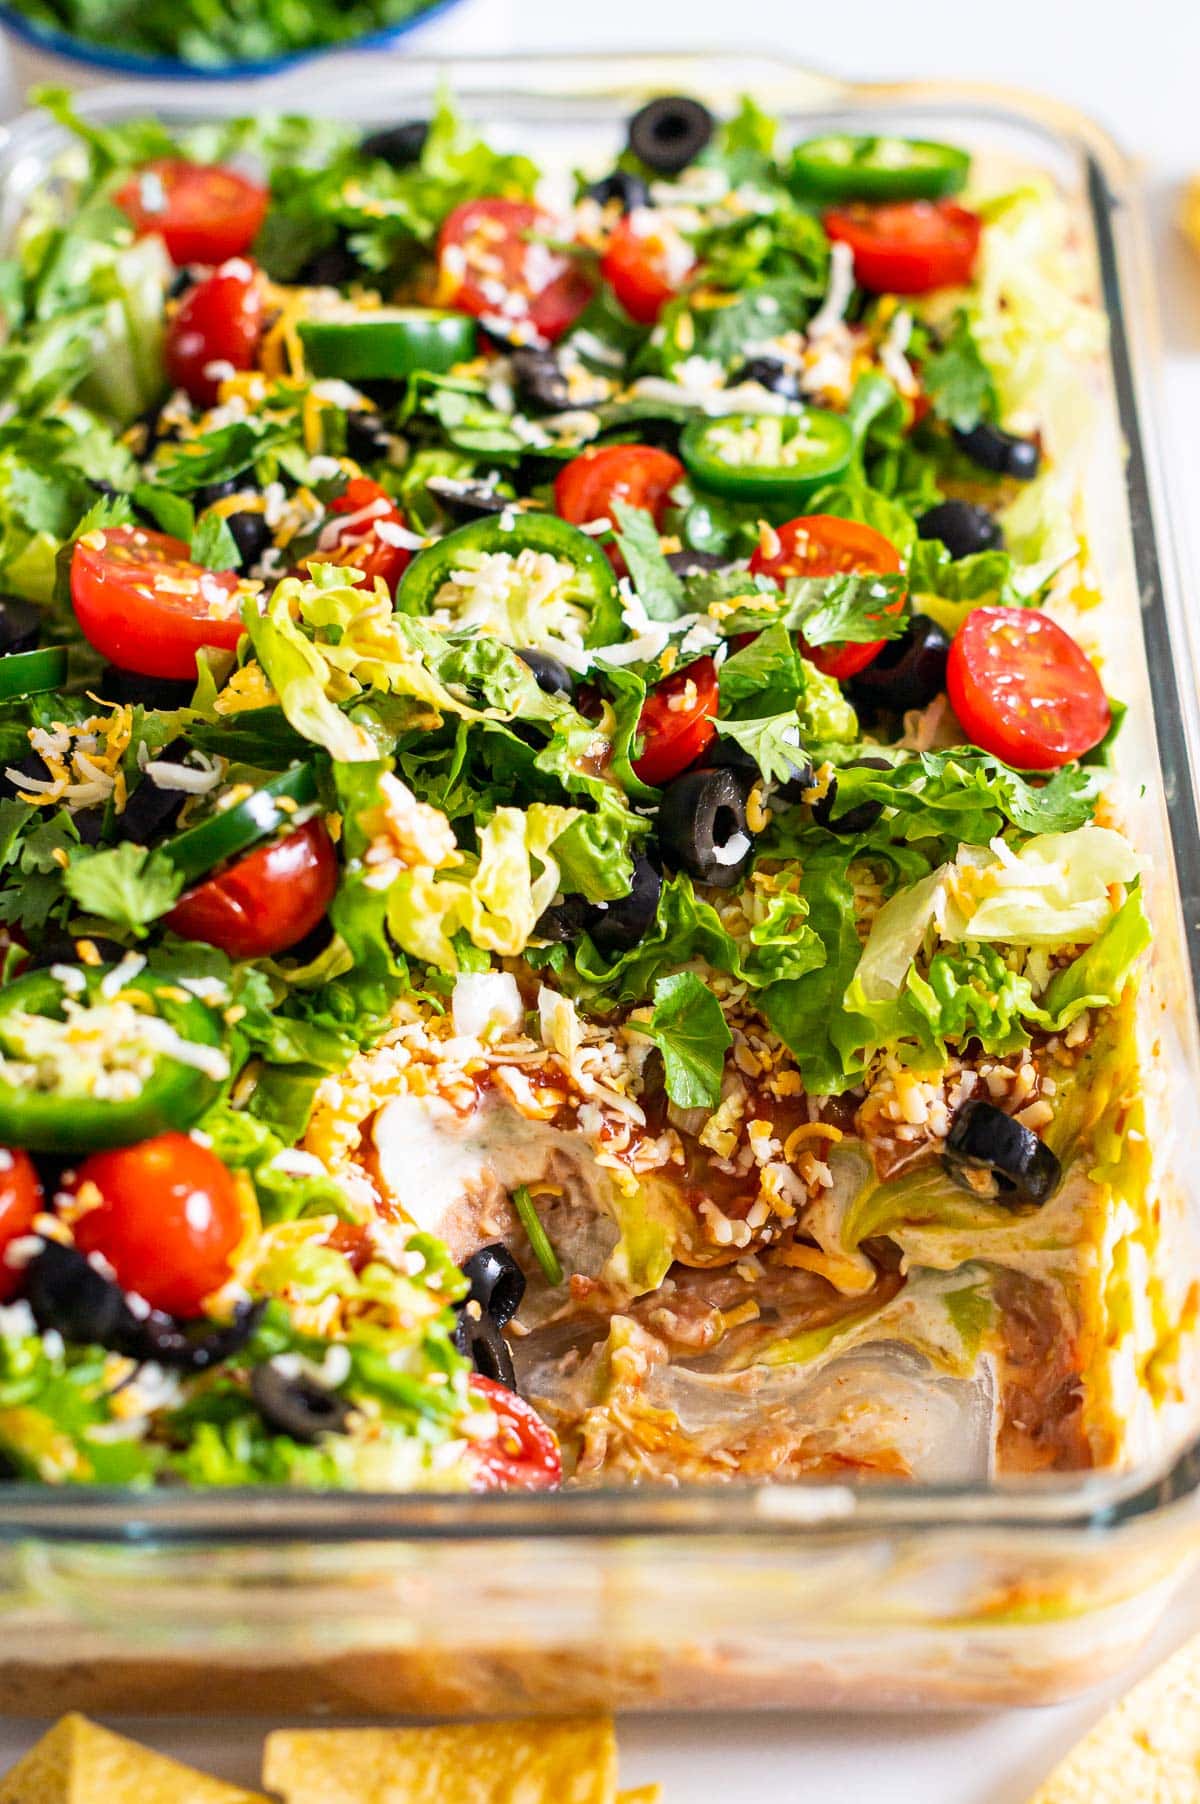 Healthy seven layer dip garnished with jalapenos and olives and served in a baking dish showing texture inside.